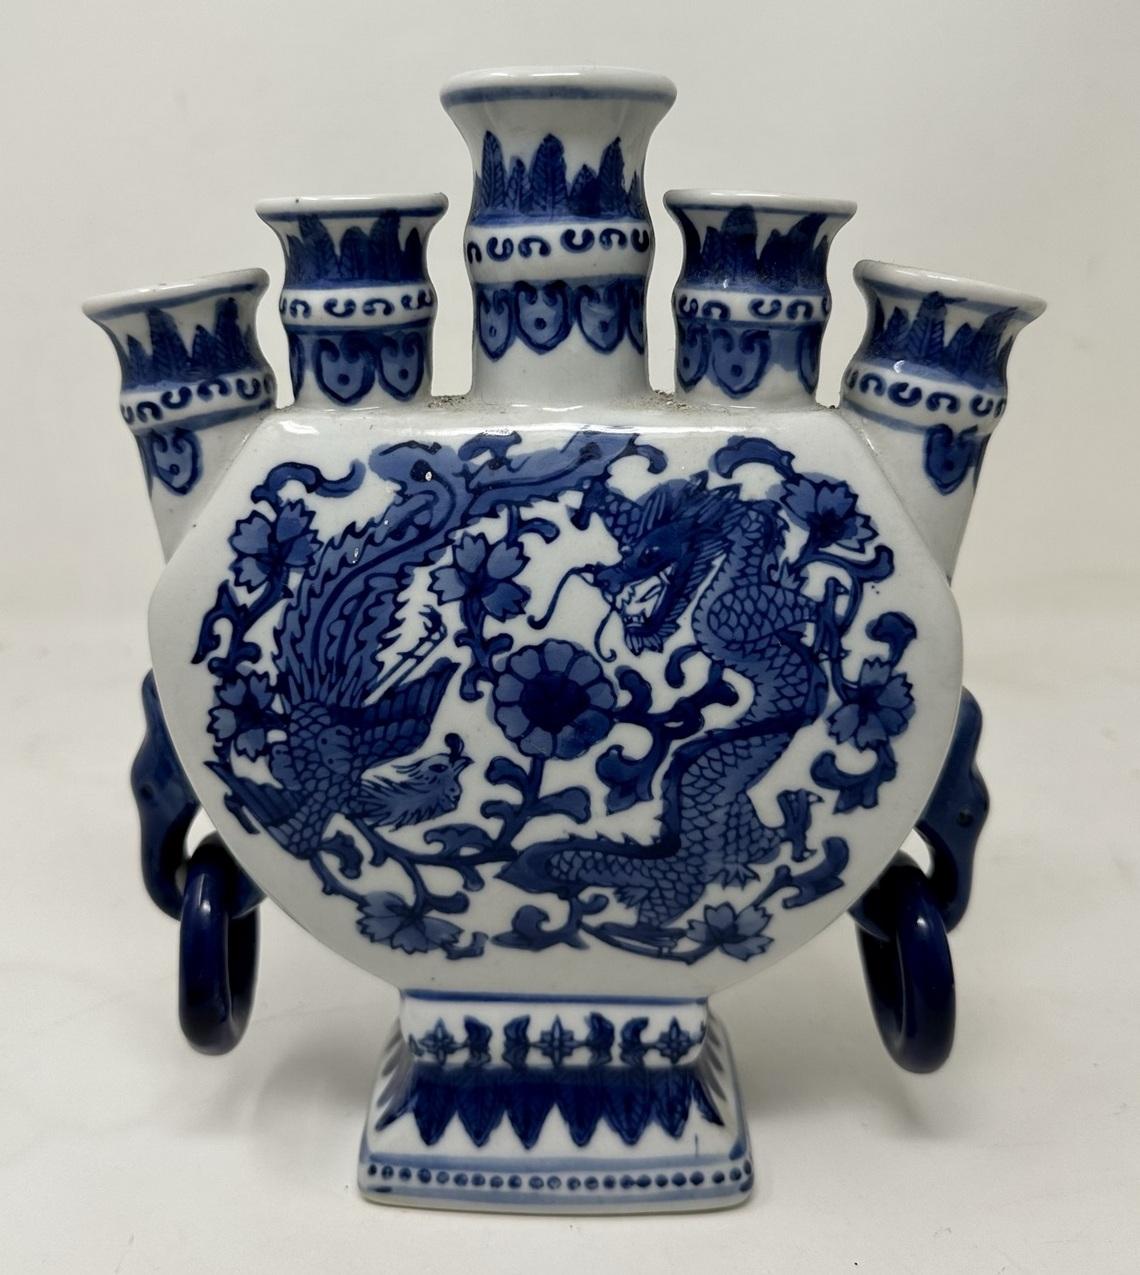 An Impressive Chinese Export “Tulip Flower Bulb Holder” Vase of discodial outline, based on a Dutch Seventeenth Century Shape, possibly early Twentieth Century. 

The superbly decorated bulbous body depicting Dragons and foliage, with five